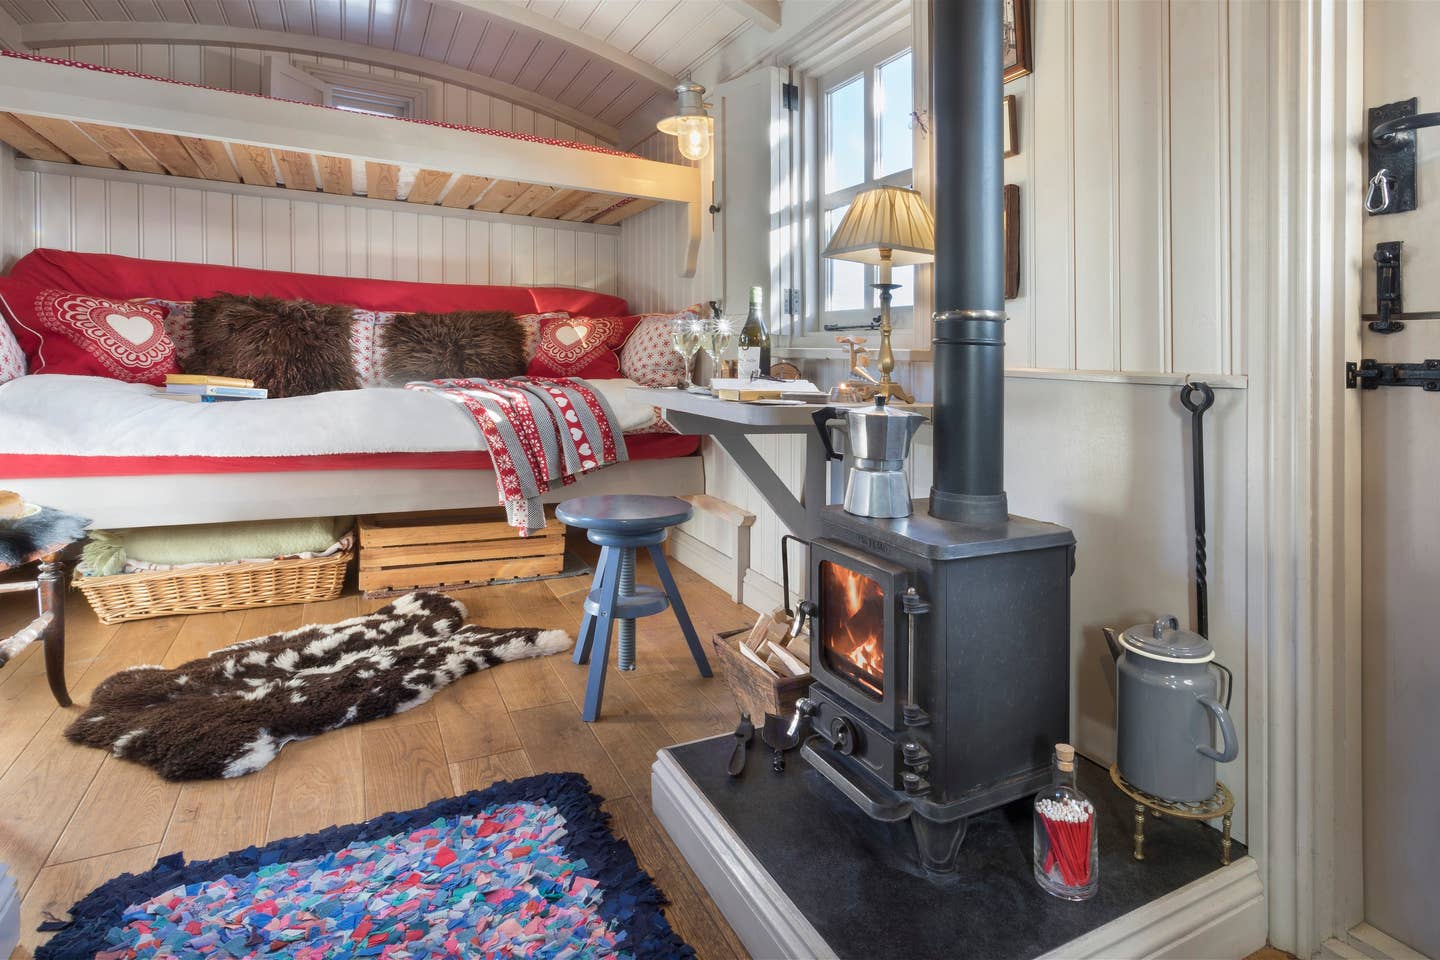 wood-stove-desk-and-sofa-bed-in-cute-shepherds-hut-lake-district-airbnb-canopy-and-stars-unusual-romantic-weekend-breaks-uk